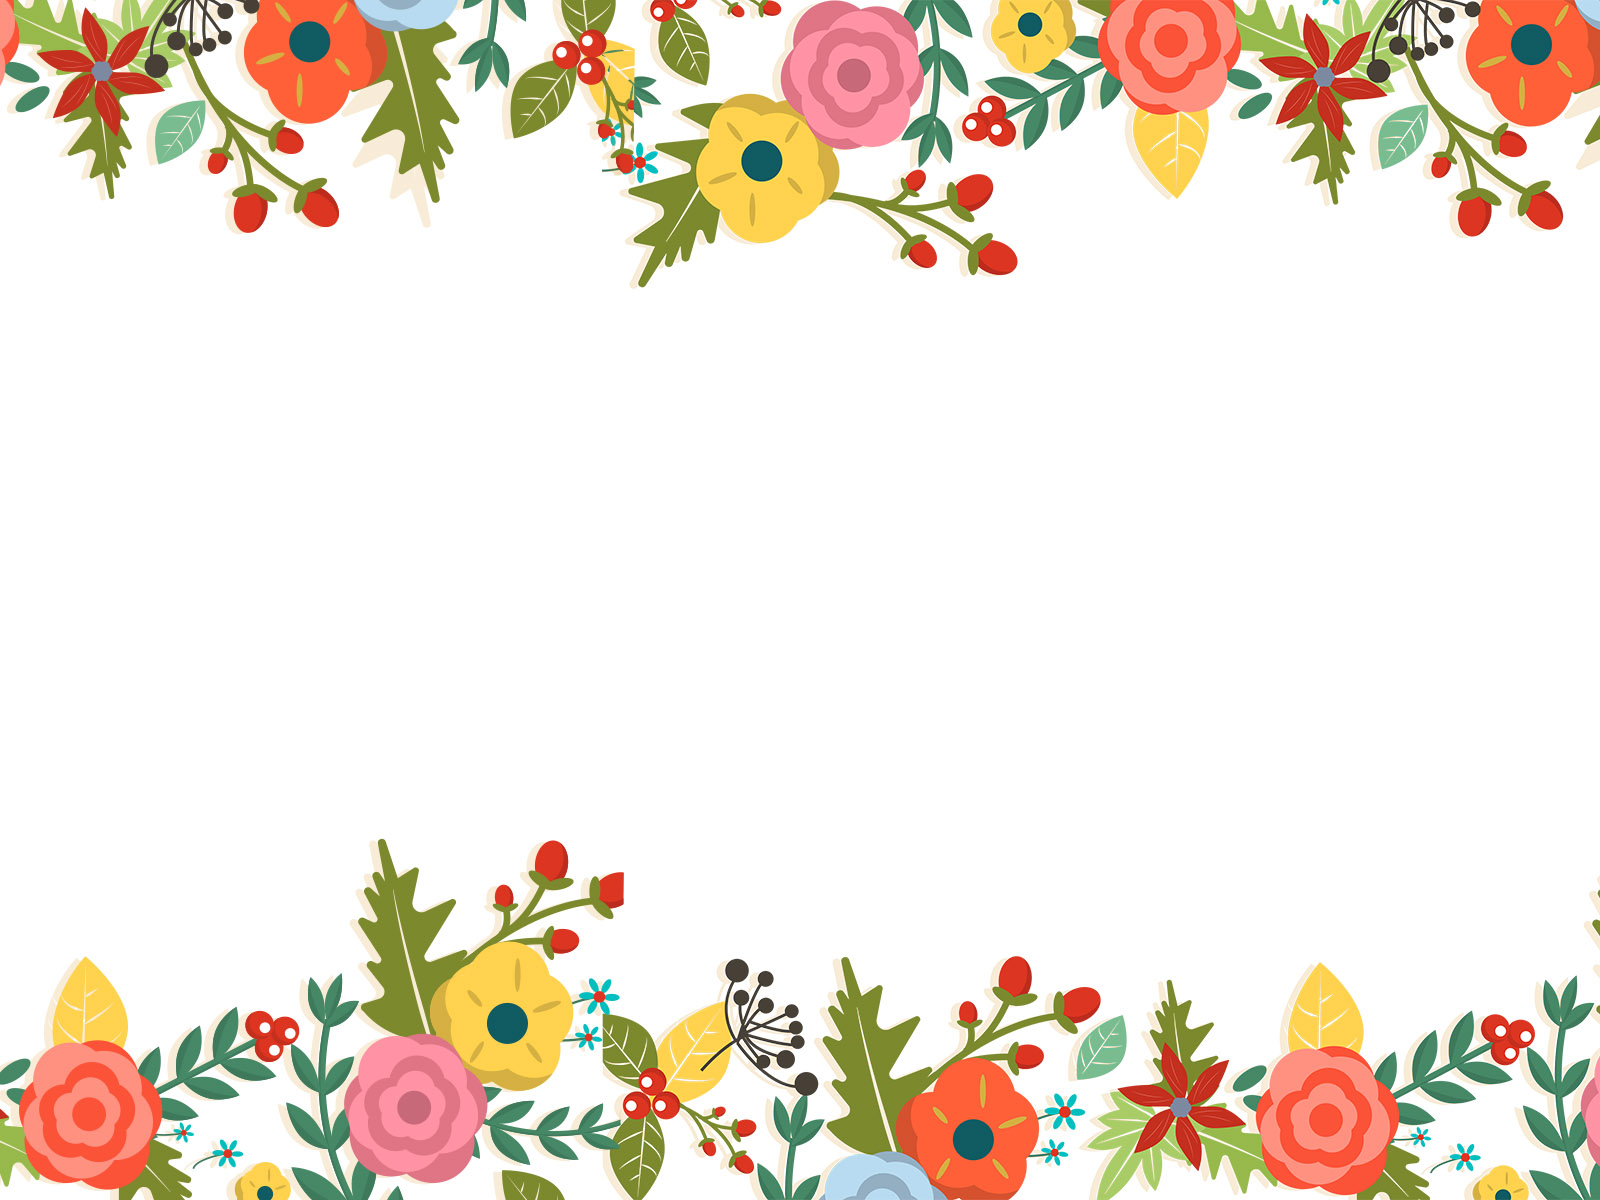 Cute Floral Powerpoint Templates Border Frames Flowers Green